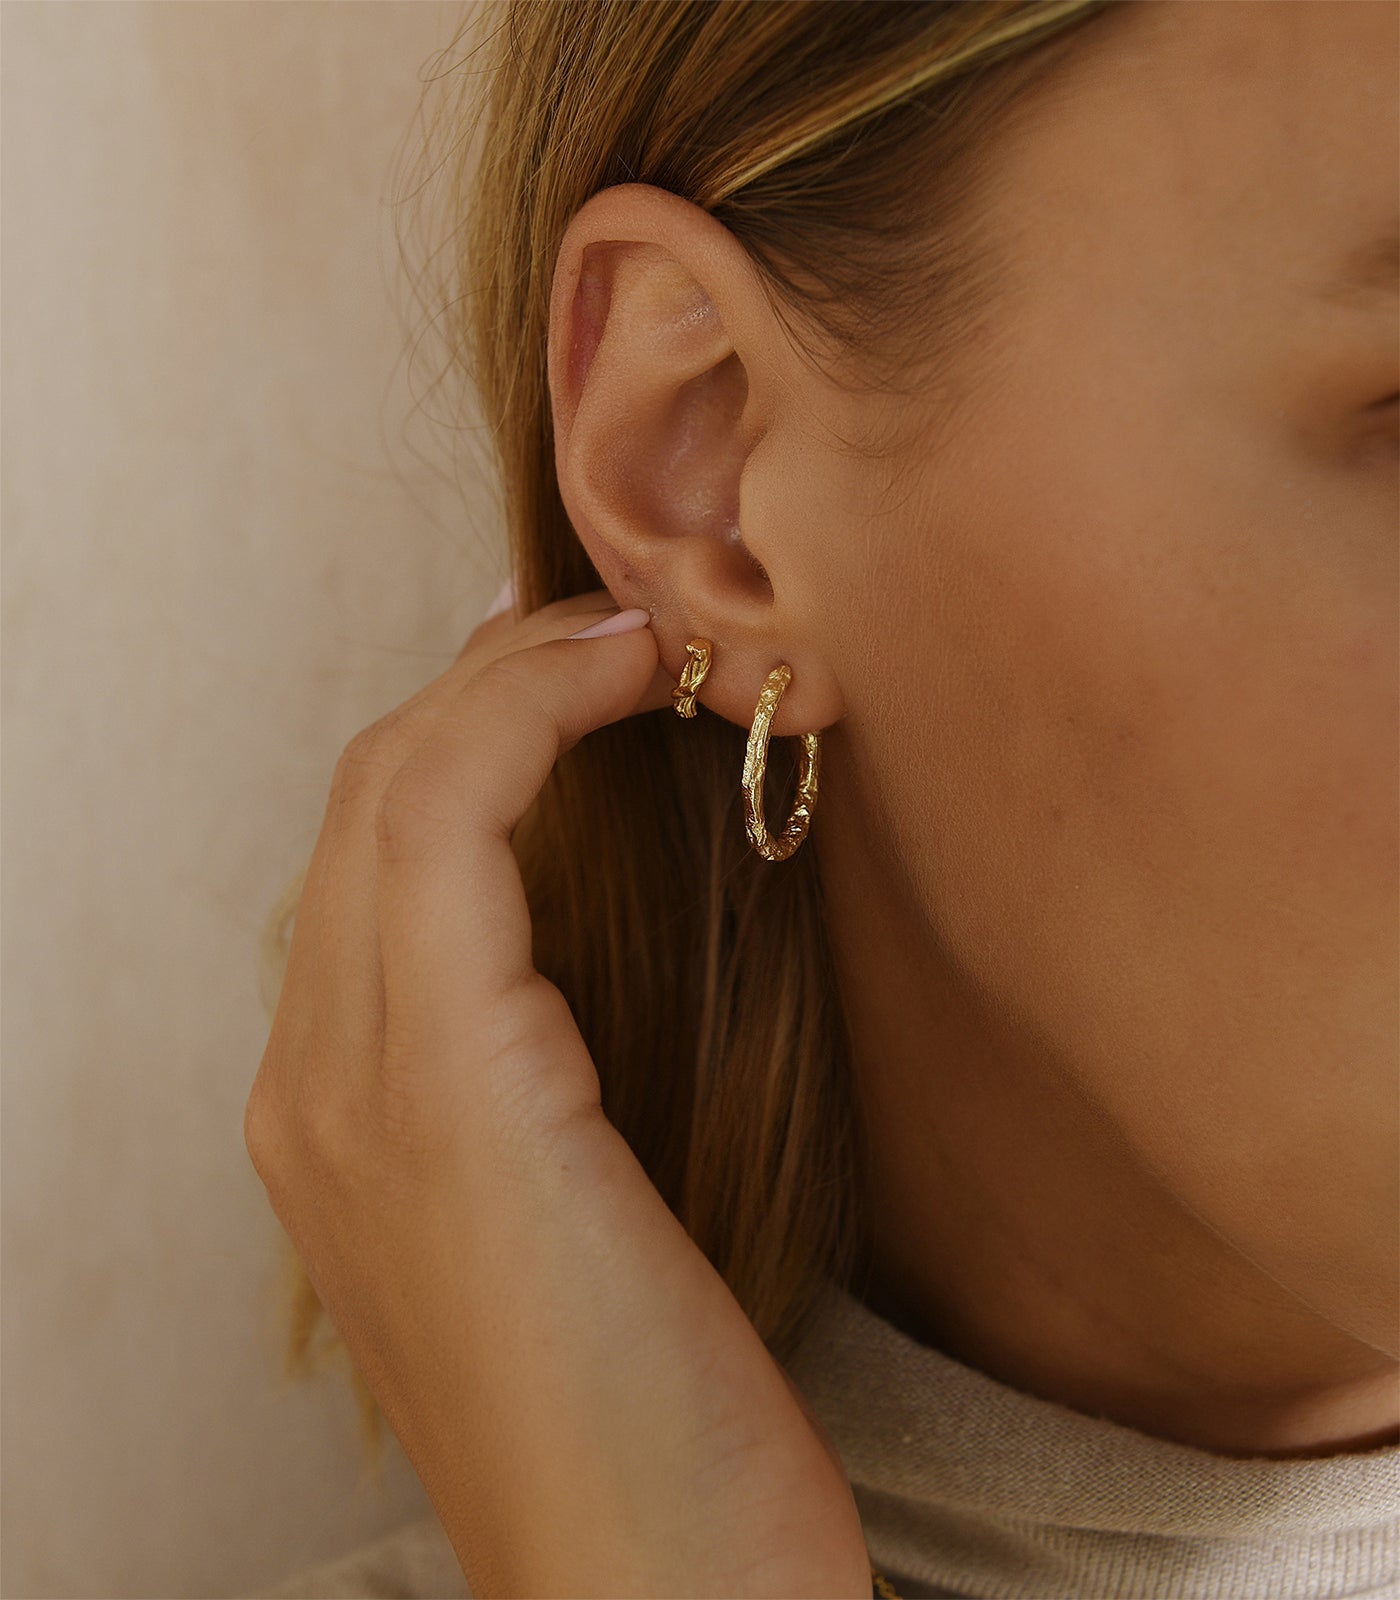 A gold vermeil stud earring paired with a textured gold vermeil hoop. The hoop is thin and small, with a sophisticated design.